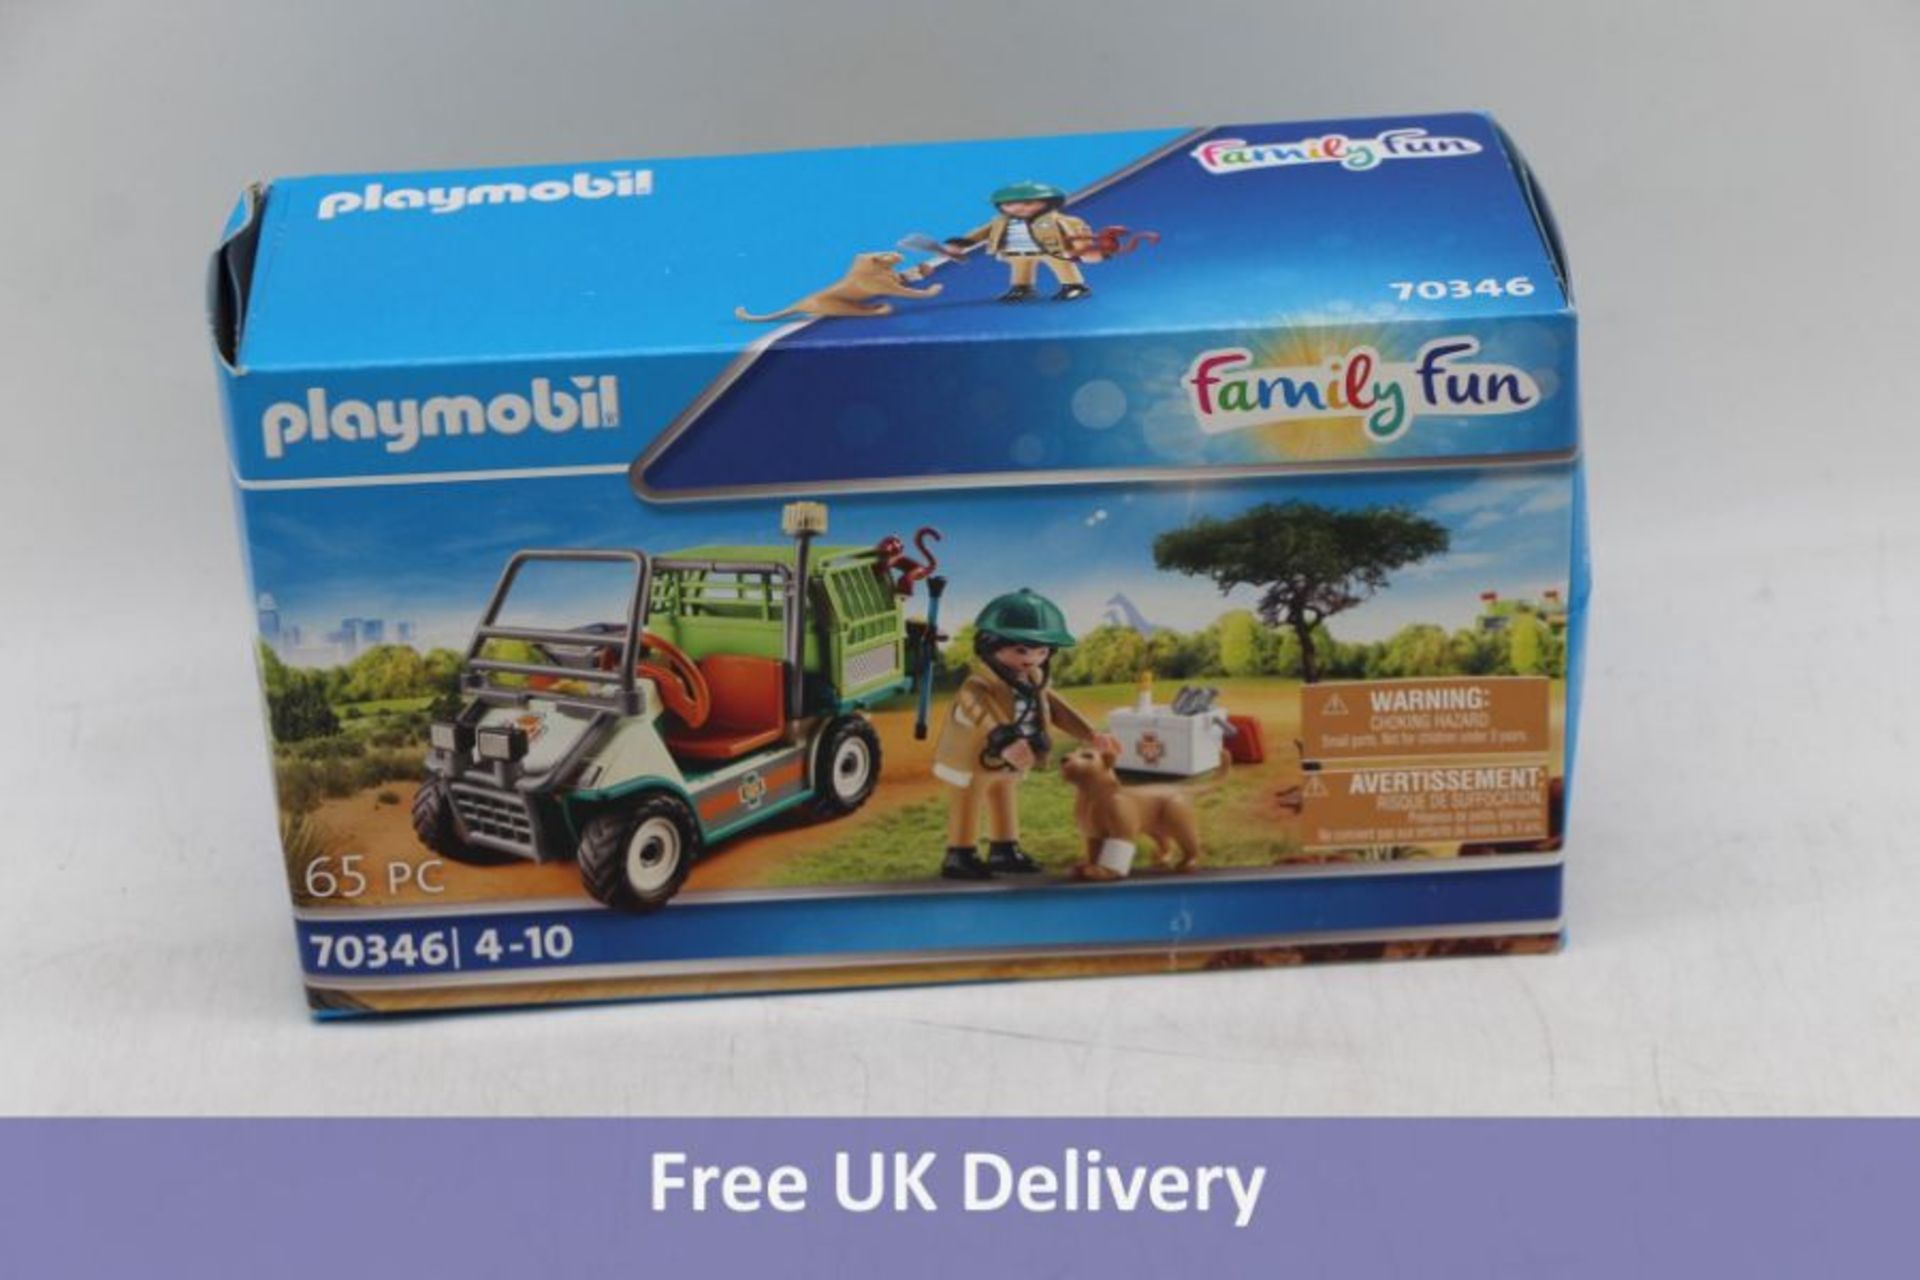 Three Playmobil Sets to include 1x Citylife, 70281, 1x Family Fun Zoo Vet with Medical Cart, 70346 a - Image 2 of 3